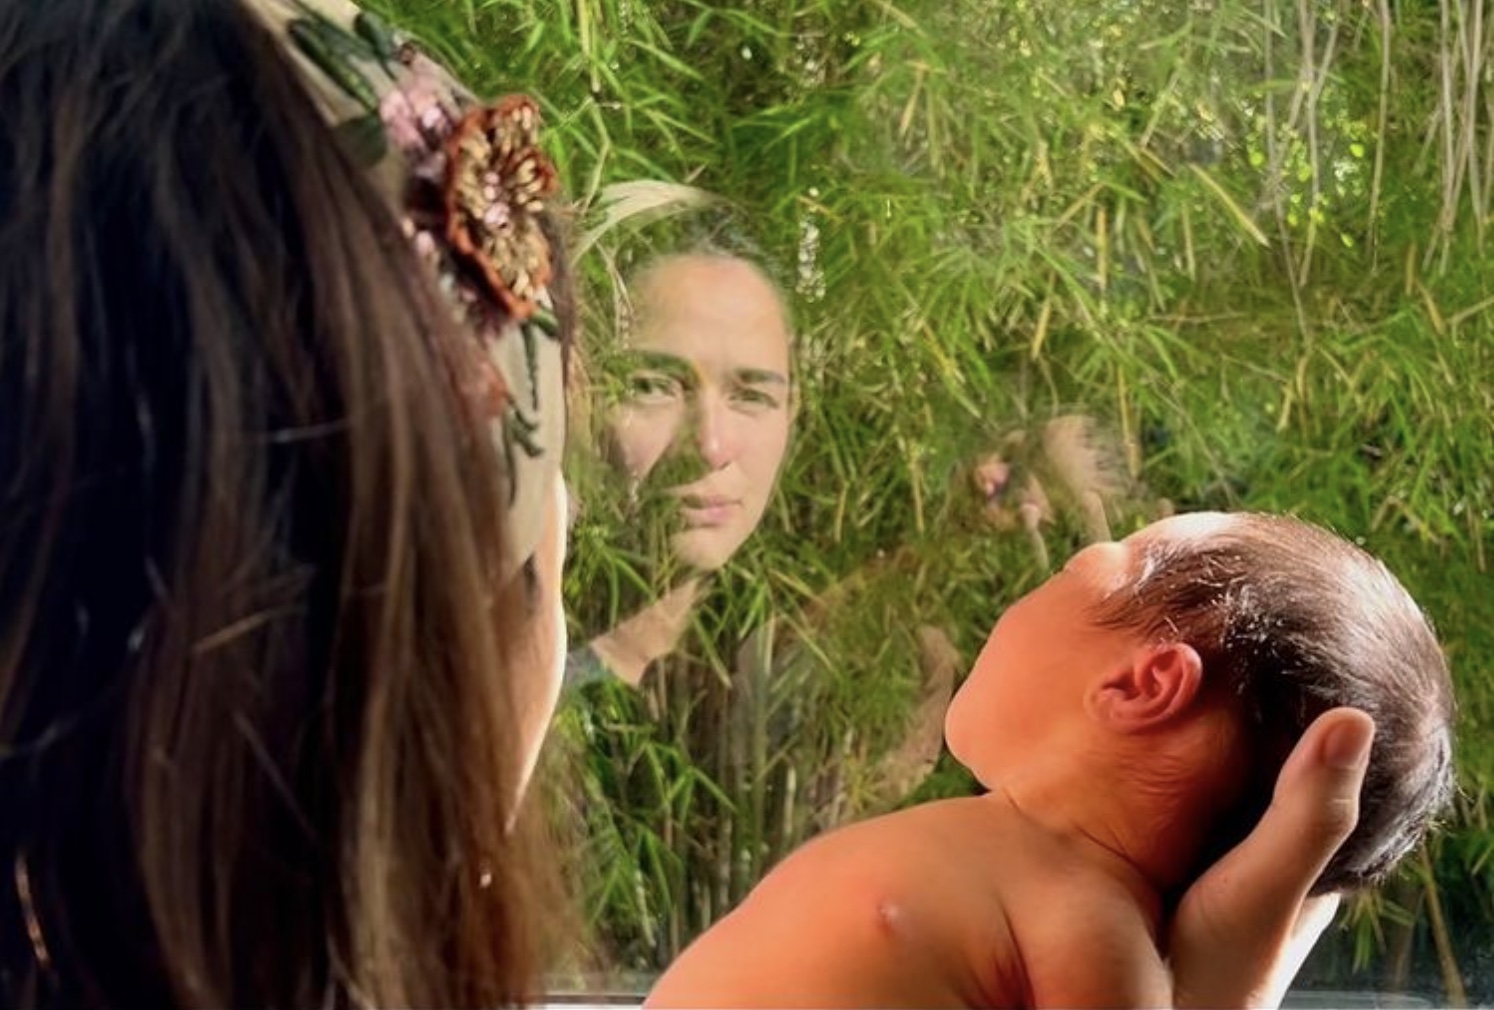 dennis trillo gives a glimpse of baby d in mothers day post for jennylyn mercado